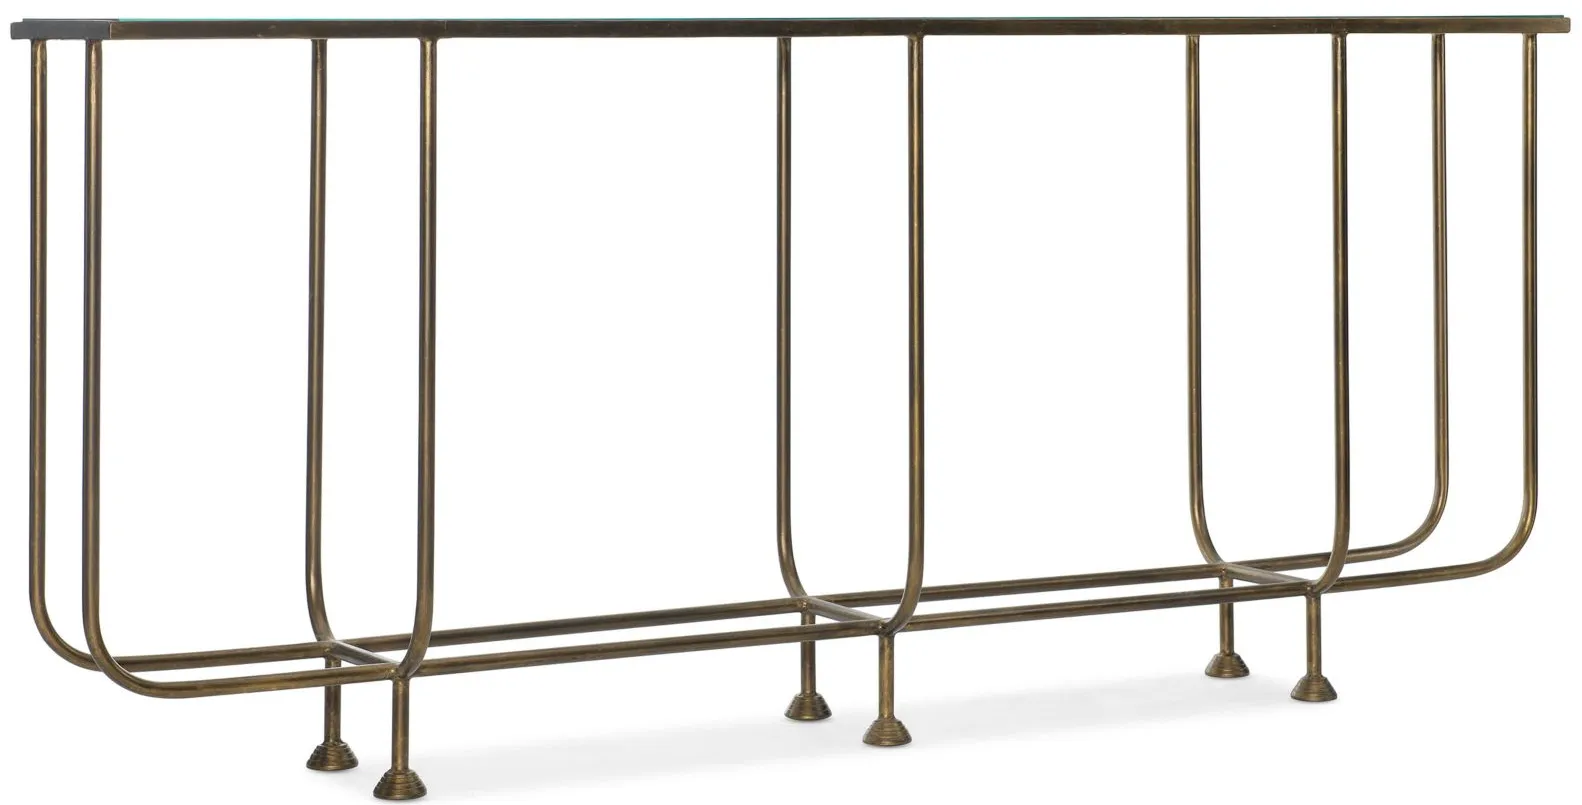 Commerce & Market Kiara Rectangle Sofa Console in Golds by Hooker Furniture